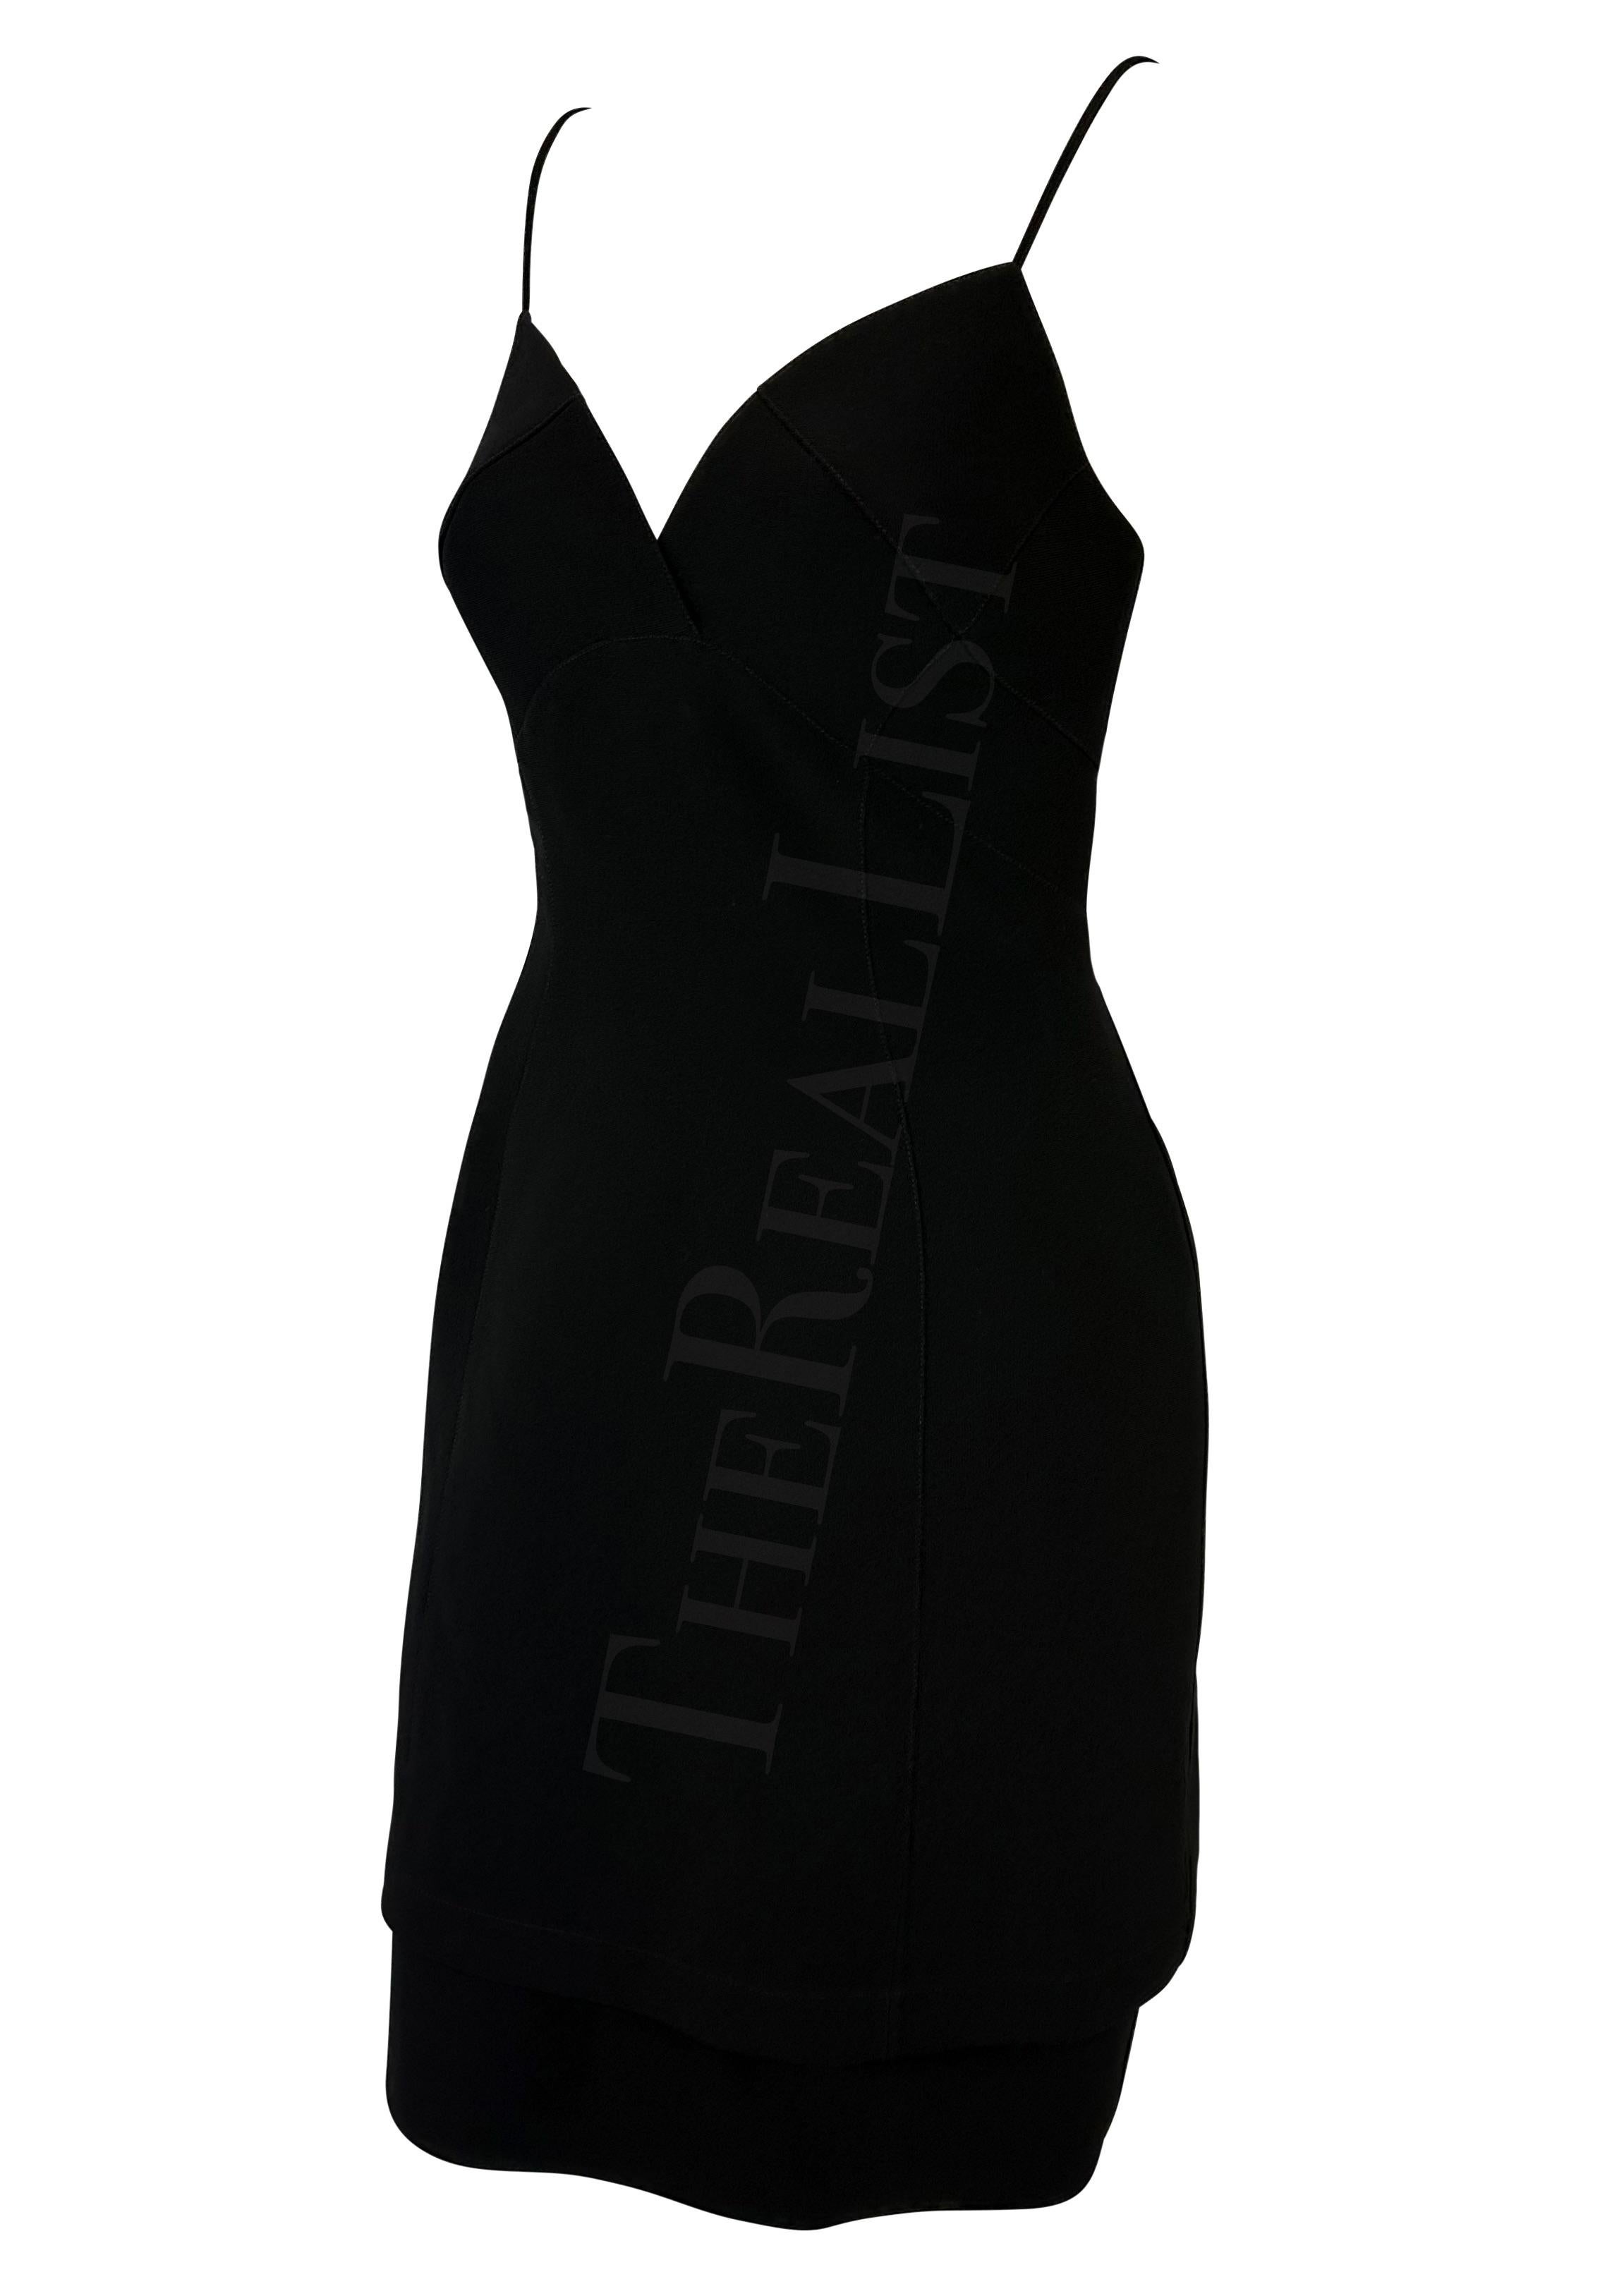 Presenting a classic black Thierry Mugler mini dress, designed by Manfred Mugler. From the late 1990s, this dress features a sweetheart neckline, spaghetti straps, and a tiered hem. Effortless chic and timeless, this sexy Thierry Mugler LBD is the